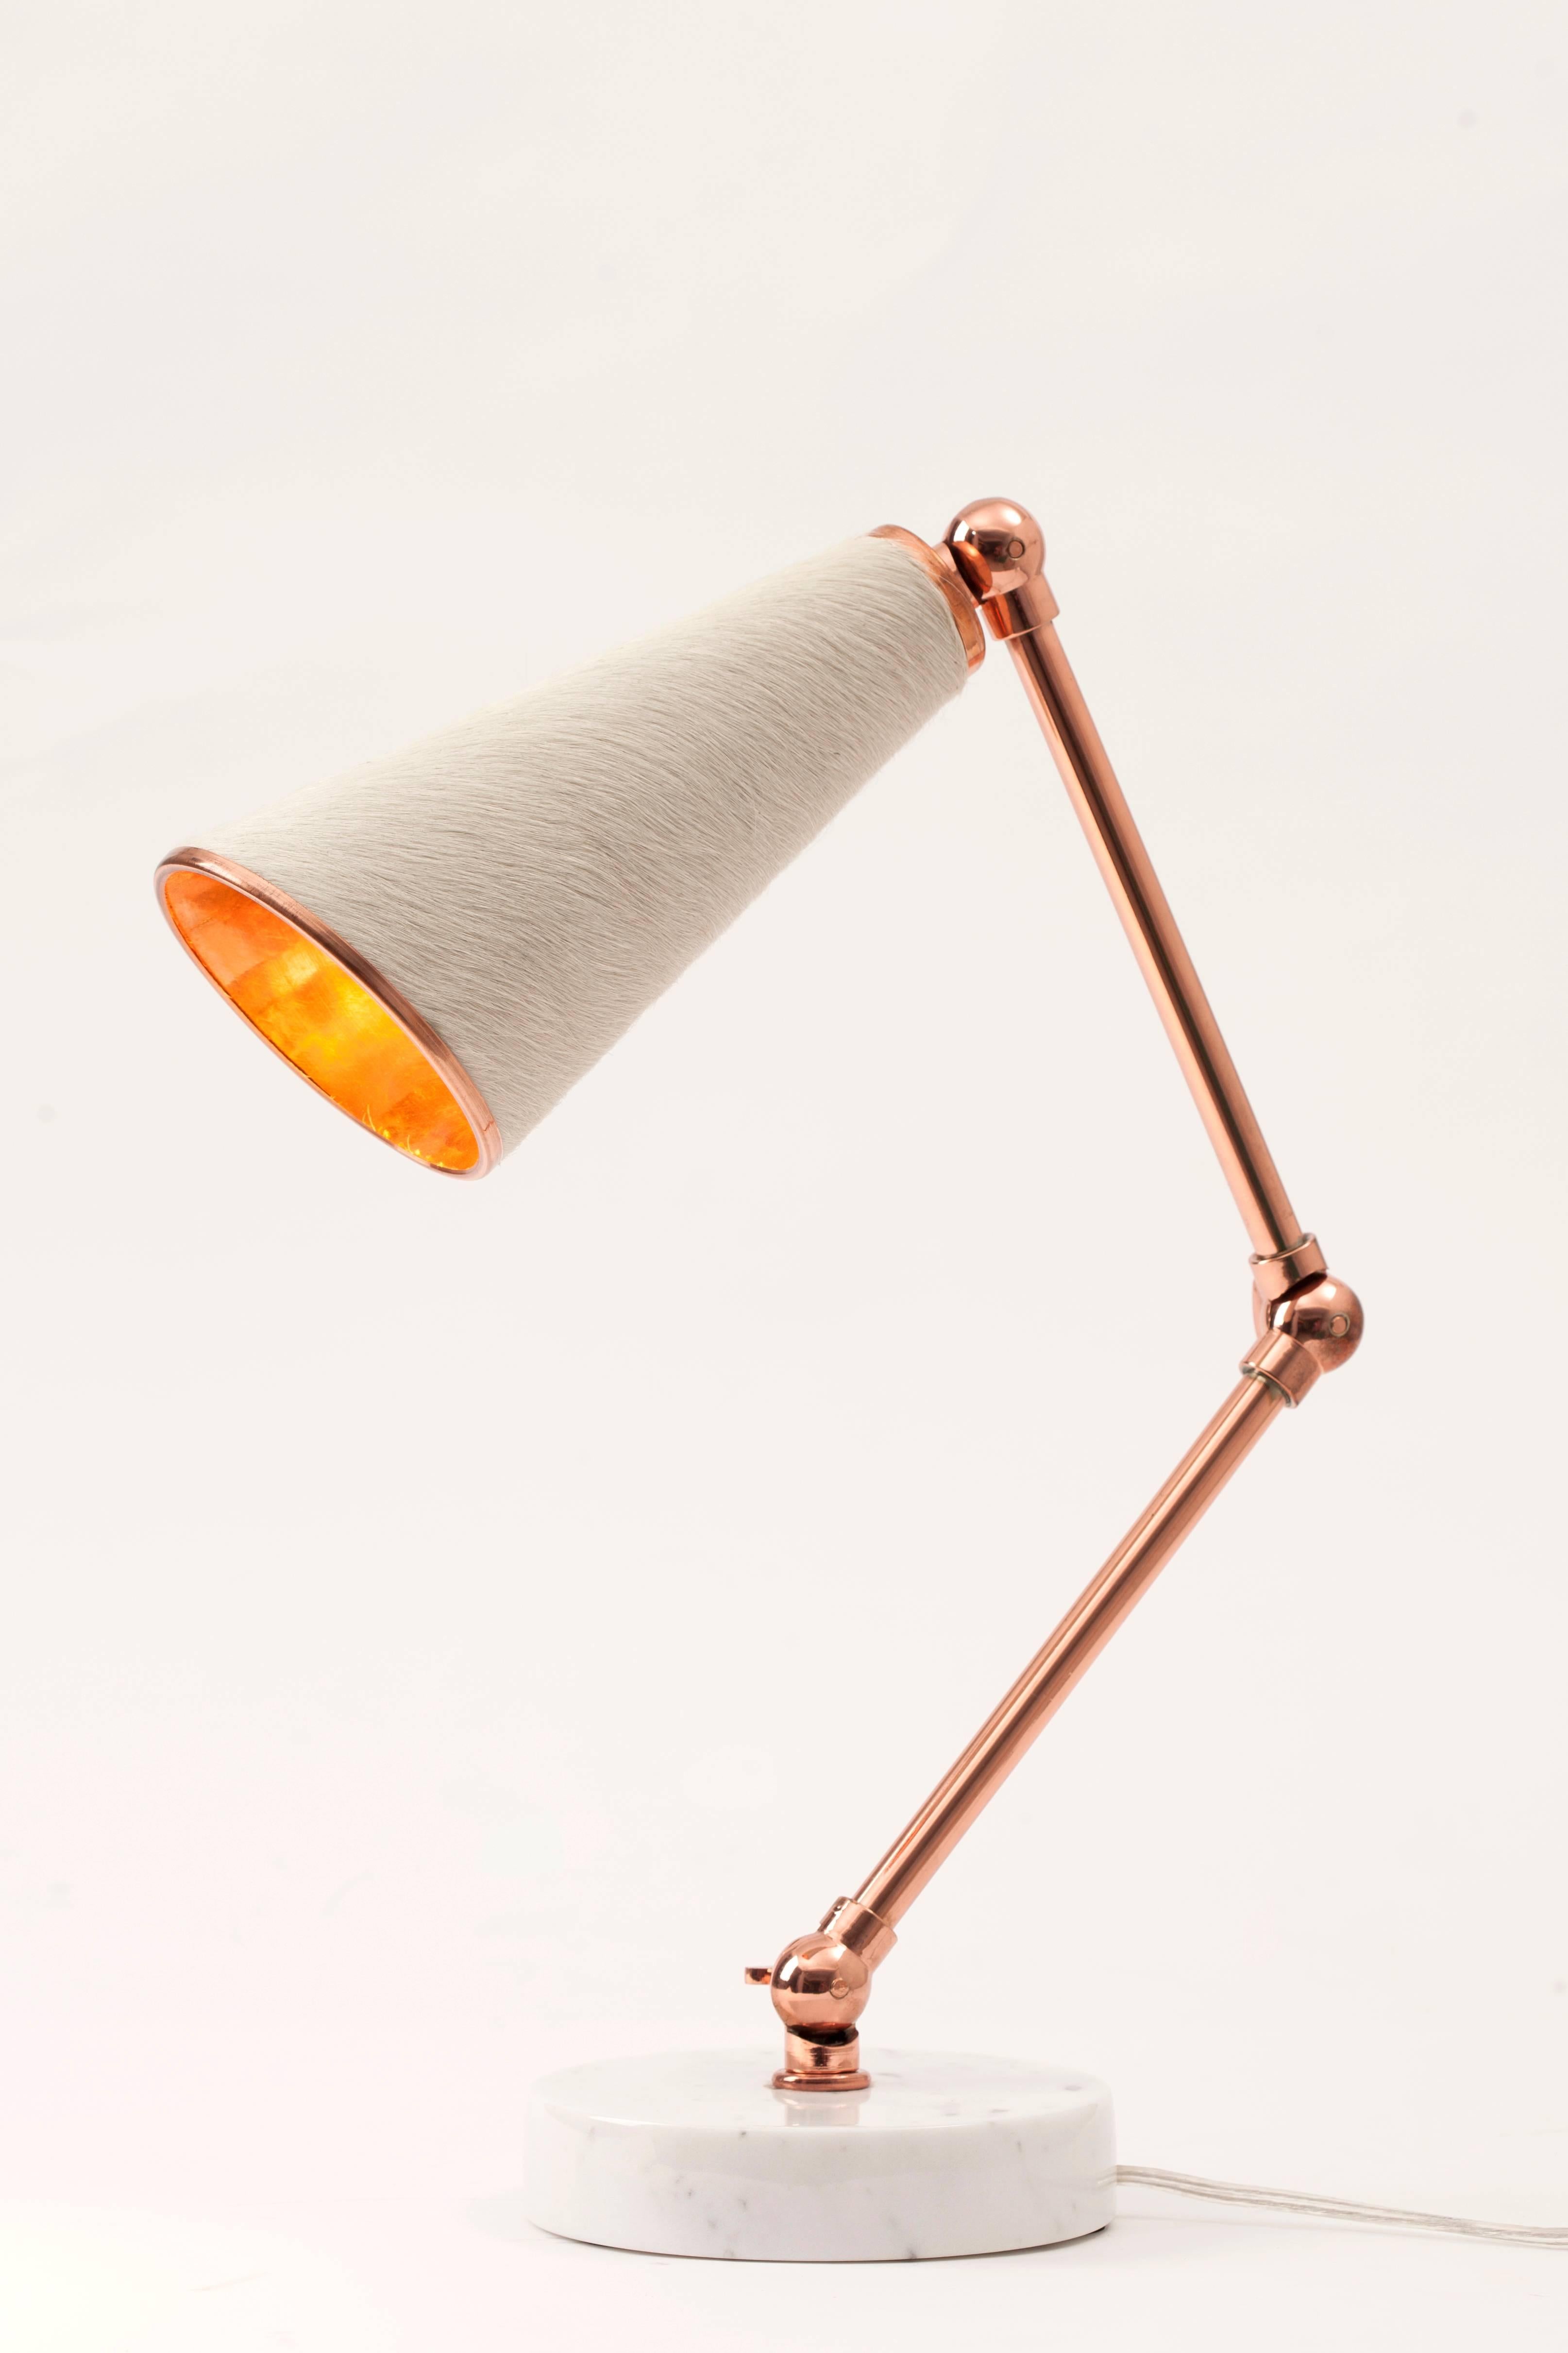 The uniquely designed Lanterna Lamp by NY-based designer Merve Kahraman is a new age robot desk lamp or table lamp with a heart.

Unique textured materials such as felt, cork and cowhide are combined with white and black coloured marbles and shiny